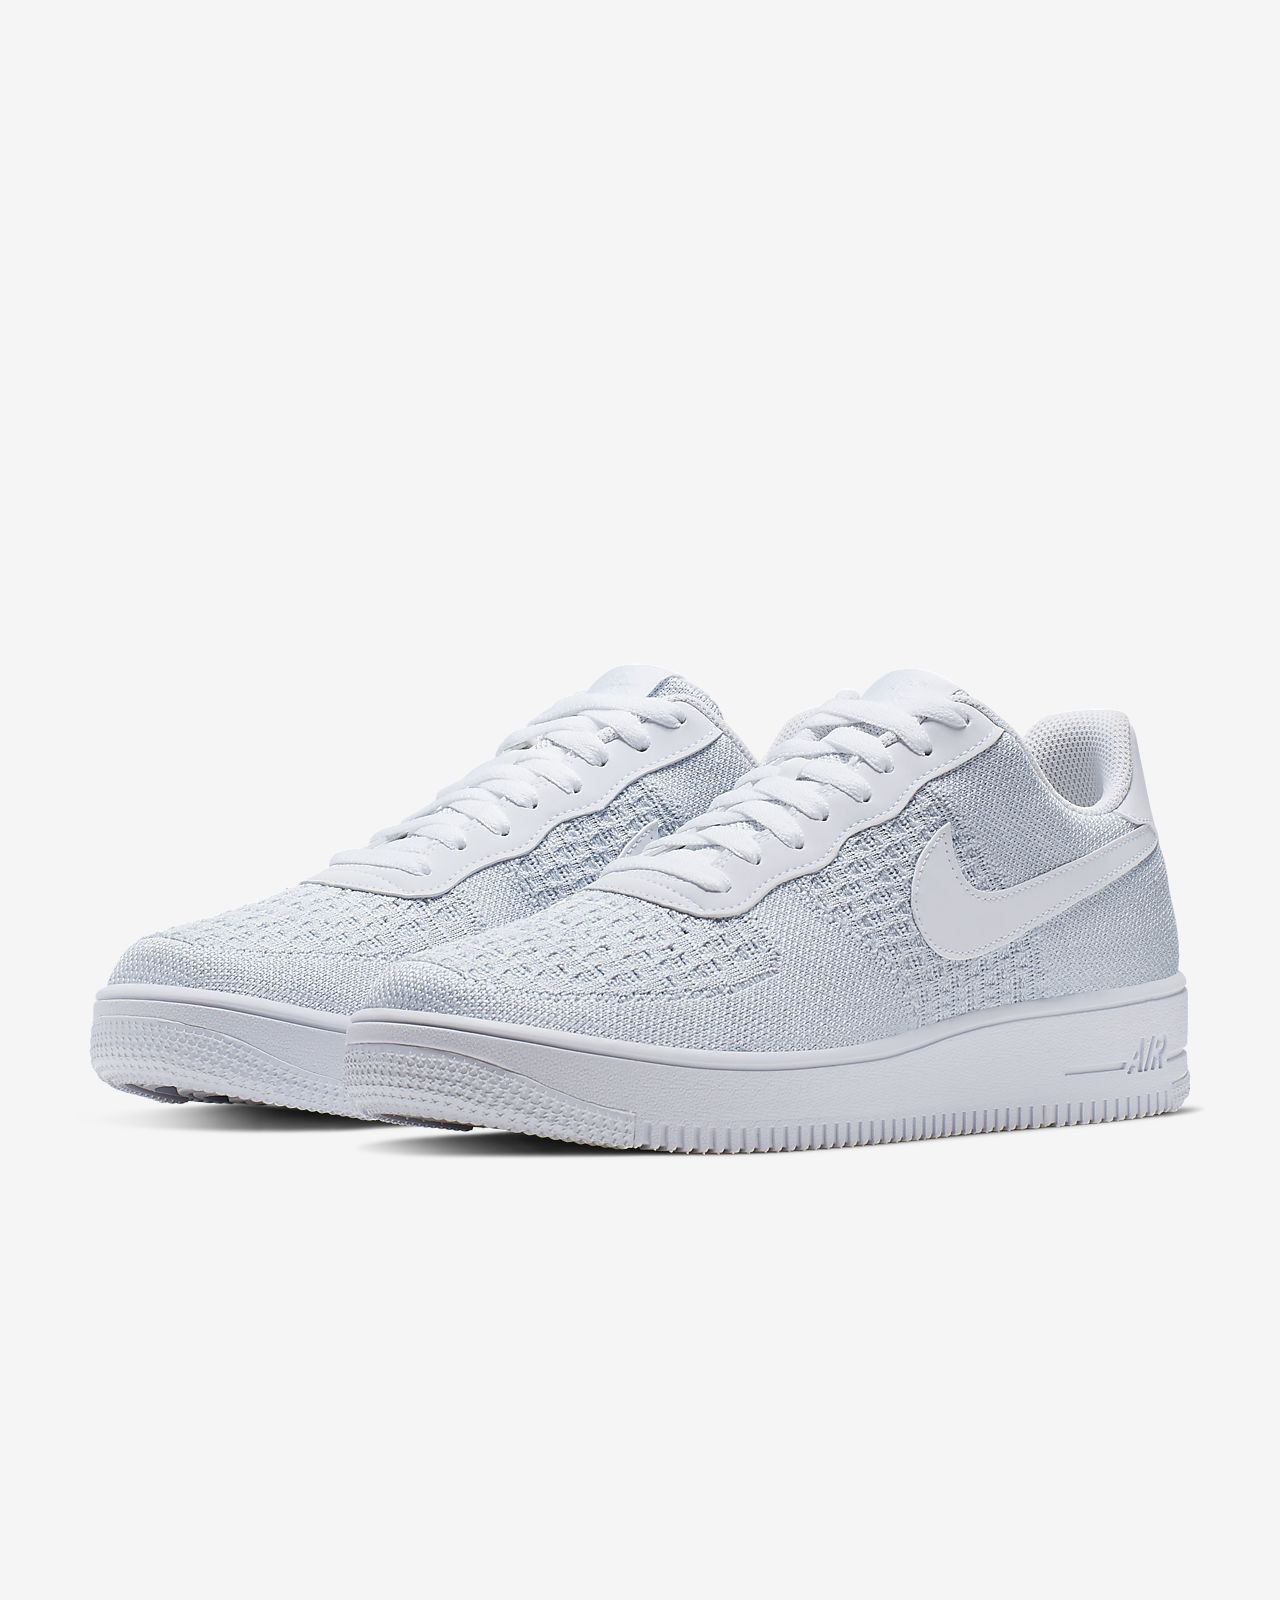 Purchase \u003e air force one flyknit femme jordan, Up to 64% OFF